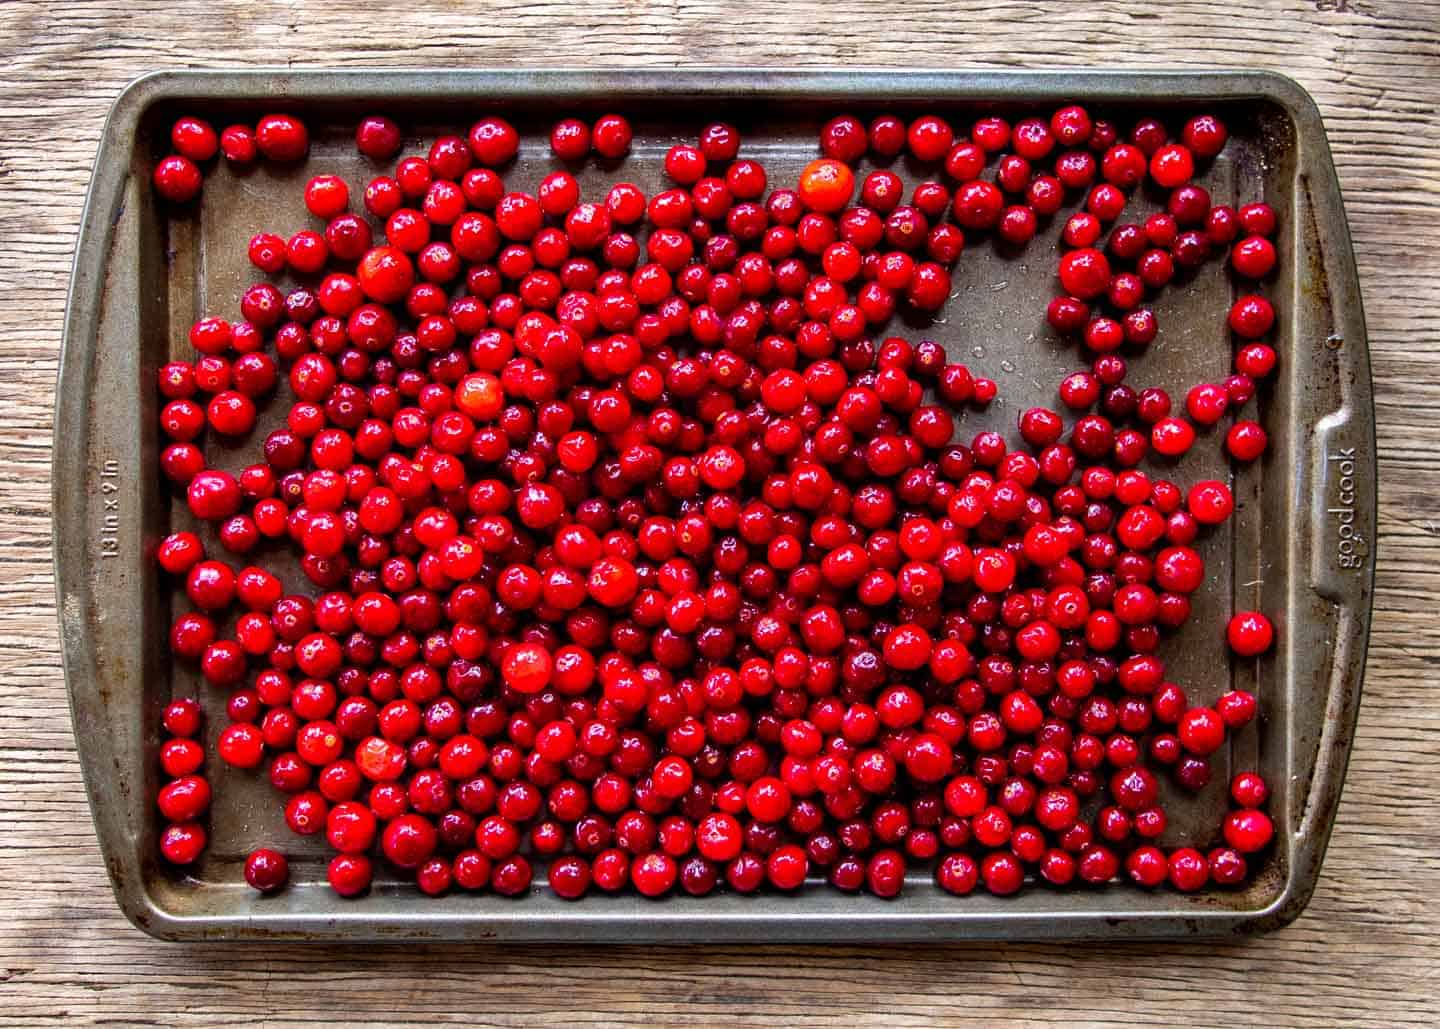 Cranberries on baking tray